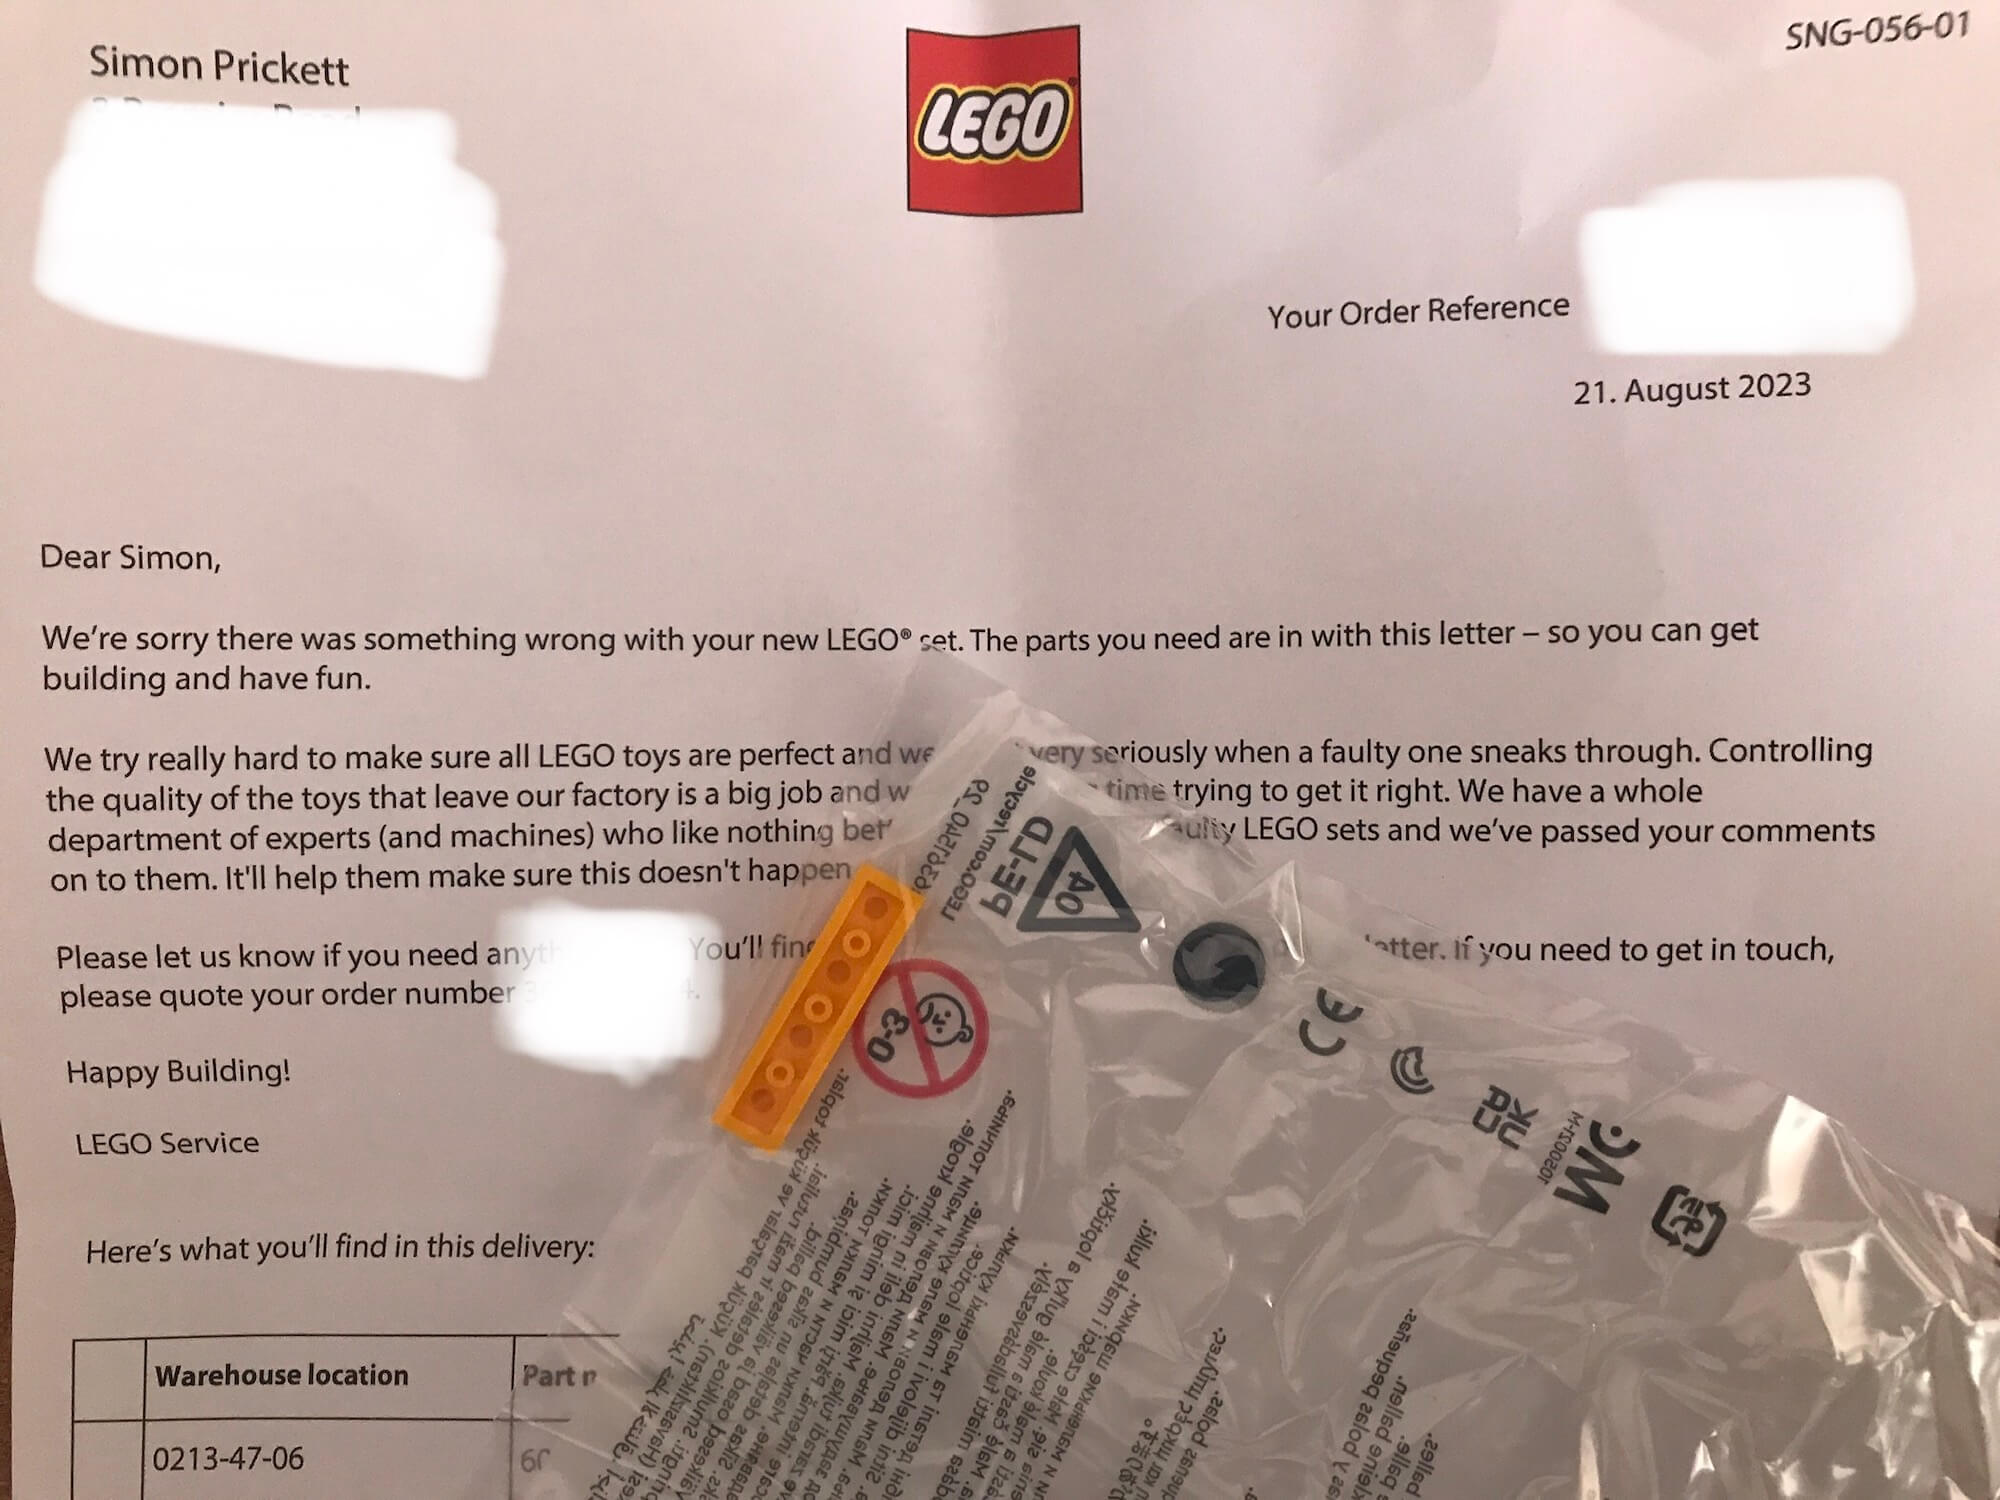 The missing piece arrives, with a nice letter from Lego.